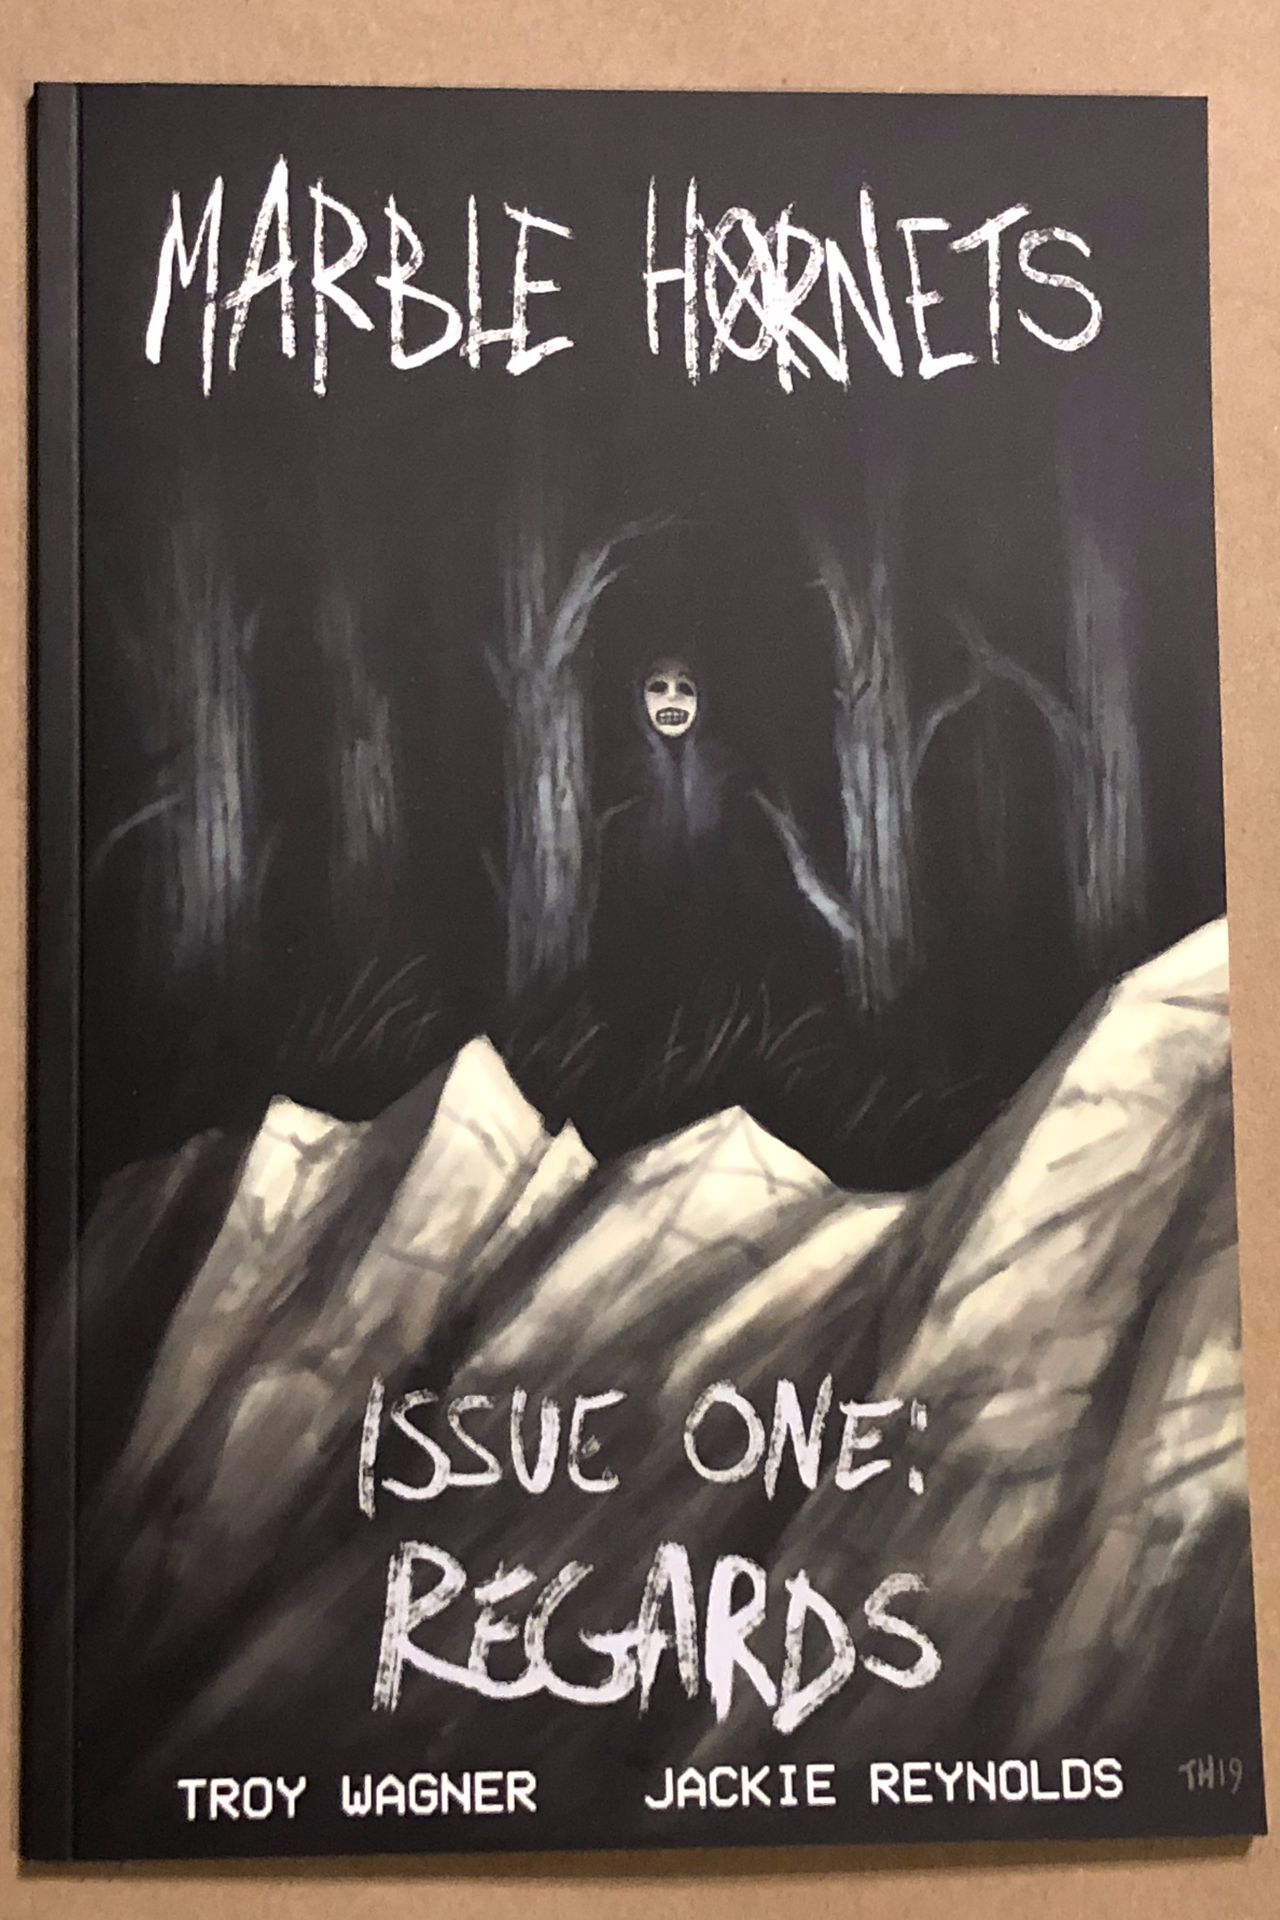 Print Edition - Marble Hornets Issue 1: Regards